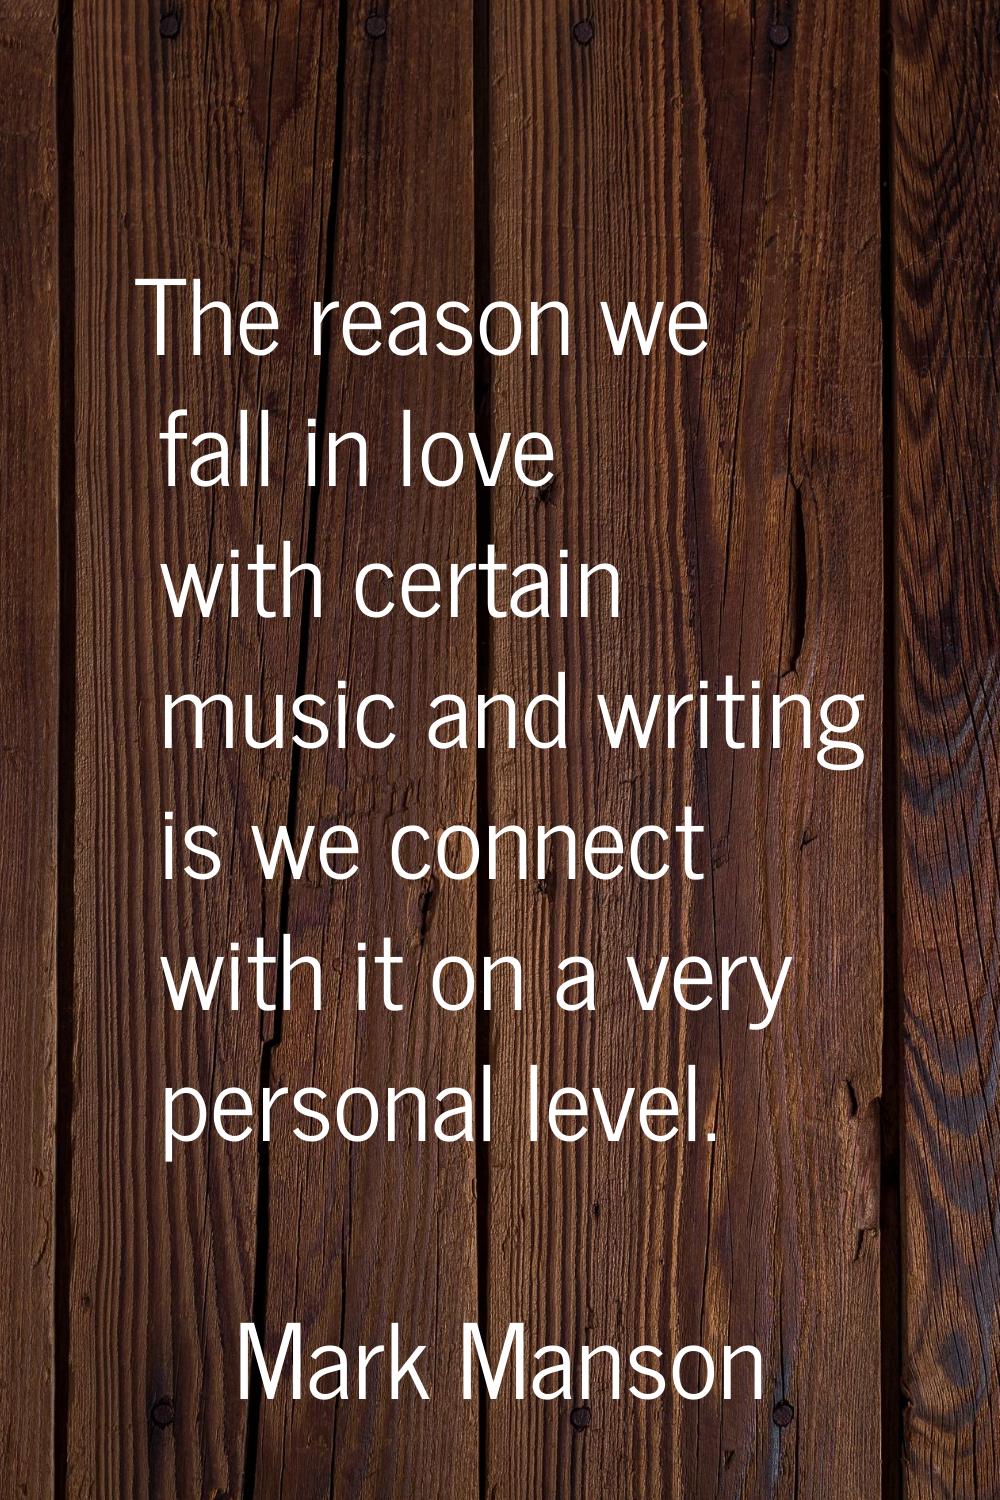 The reason we fall in love with certain music and writing is we connect with it on a very personal 